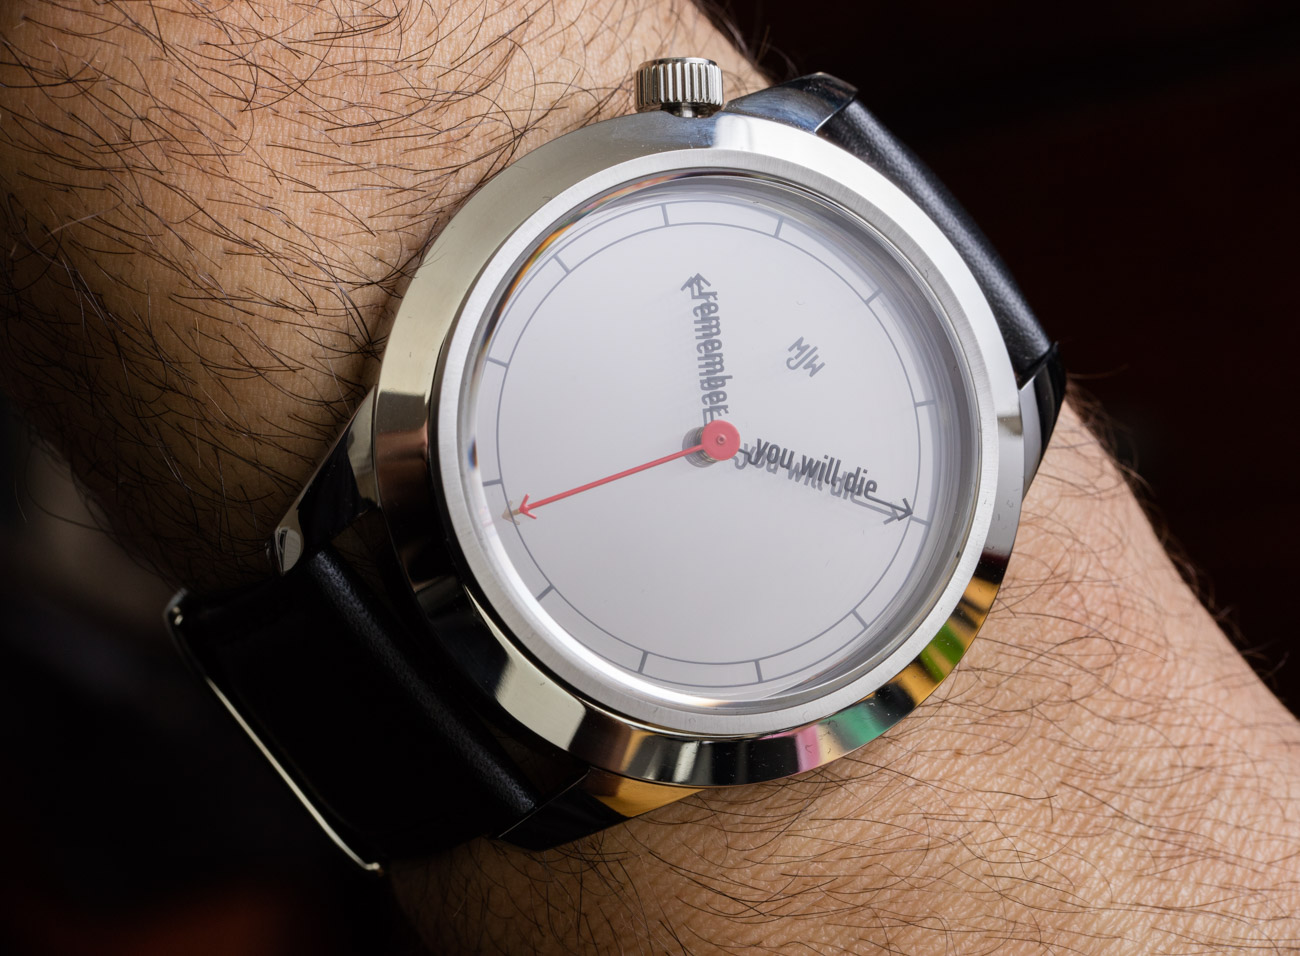 Hands-On: Mr. Jones Watch The Accurate XL With ‘Remember You Will Die’ Hands